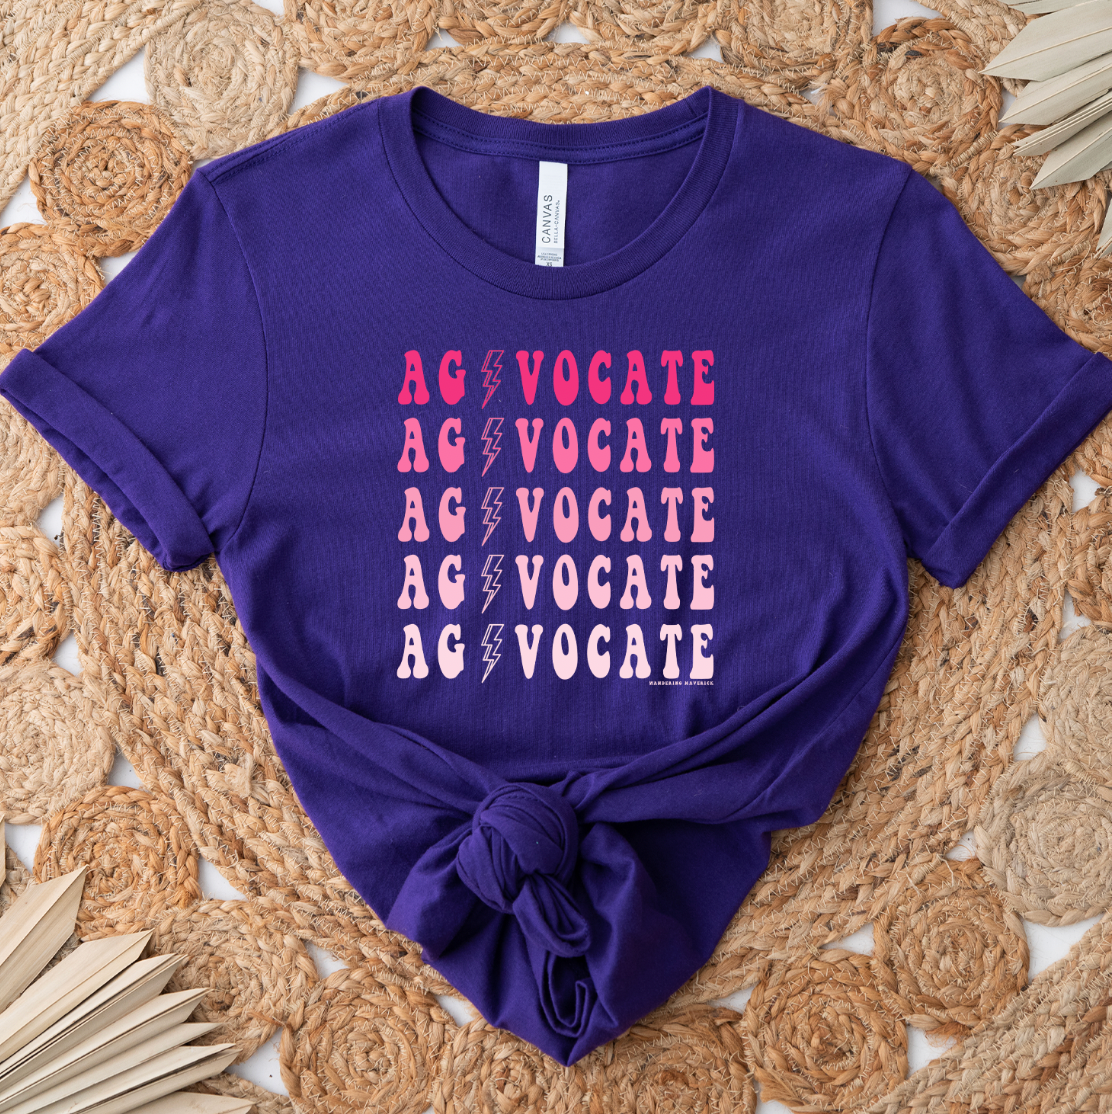 Agvocate Bolt Pink T-Shirt (XS-4XL) - Multiple Colors!